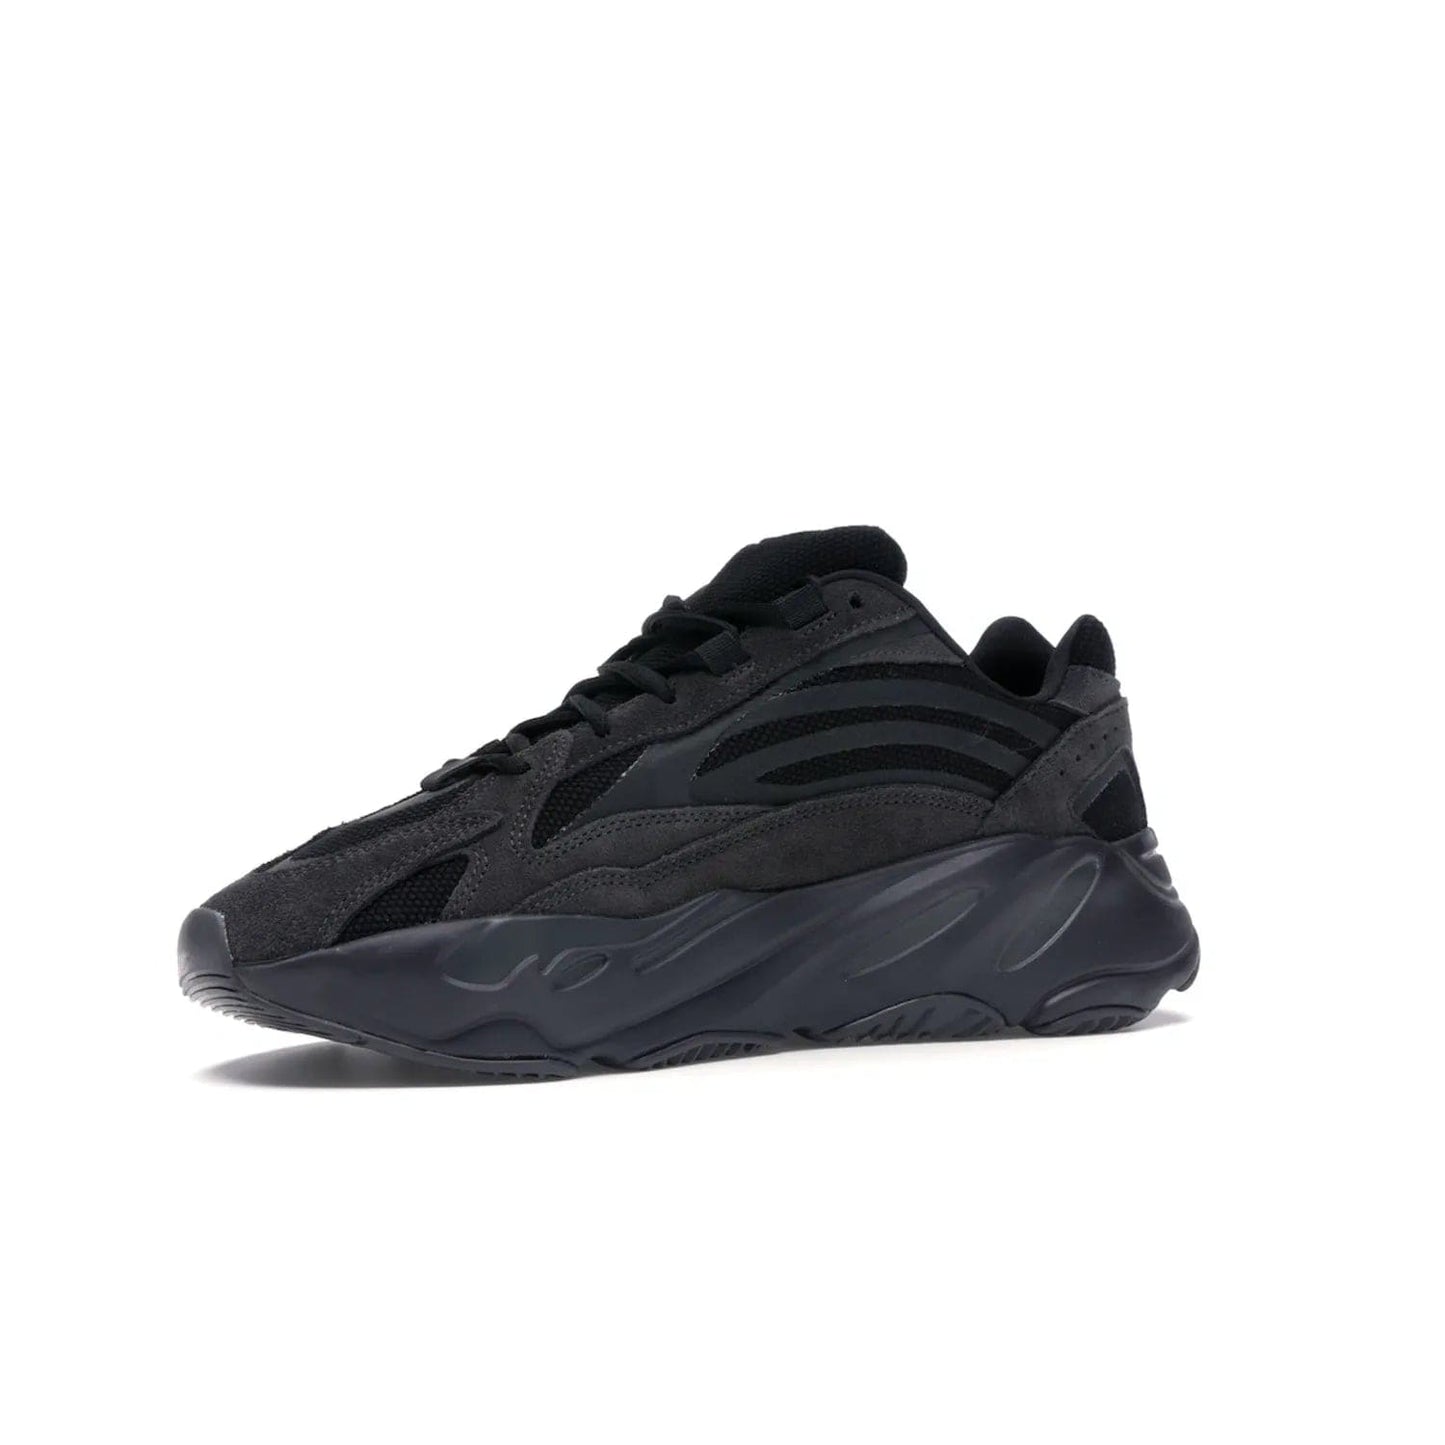 adidas Yeezy Boost 700 V2 Vanta - Image 16 - Only at www.BallersClubKickz.com - Introducing the adidas Yeezy Boost 700 V2 Vanta - a sleek and stylish all-black design featuring a combination of mesh, leather, and suede construction with signature Boost cushioning in the sole. The ultimate in comfort and support.